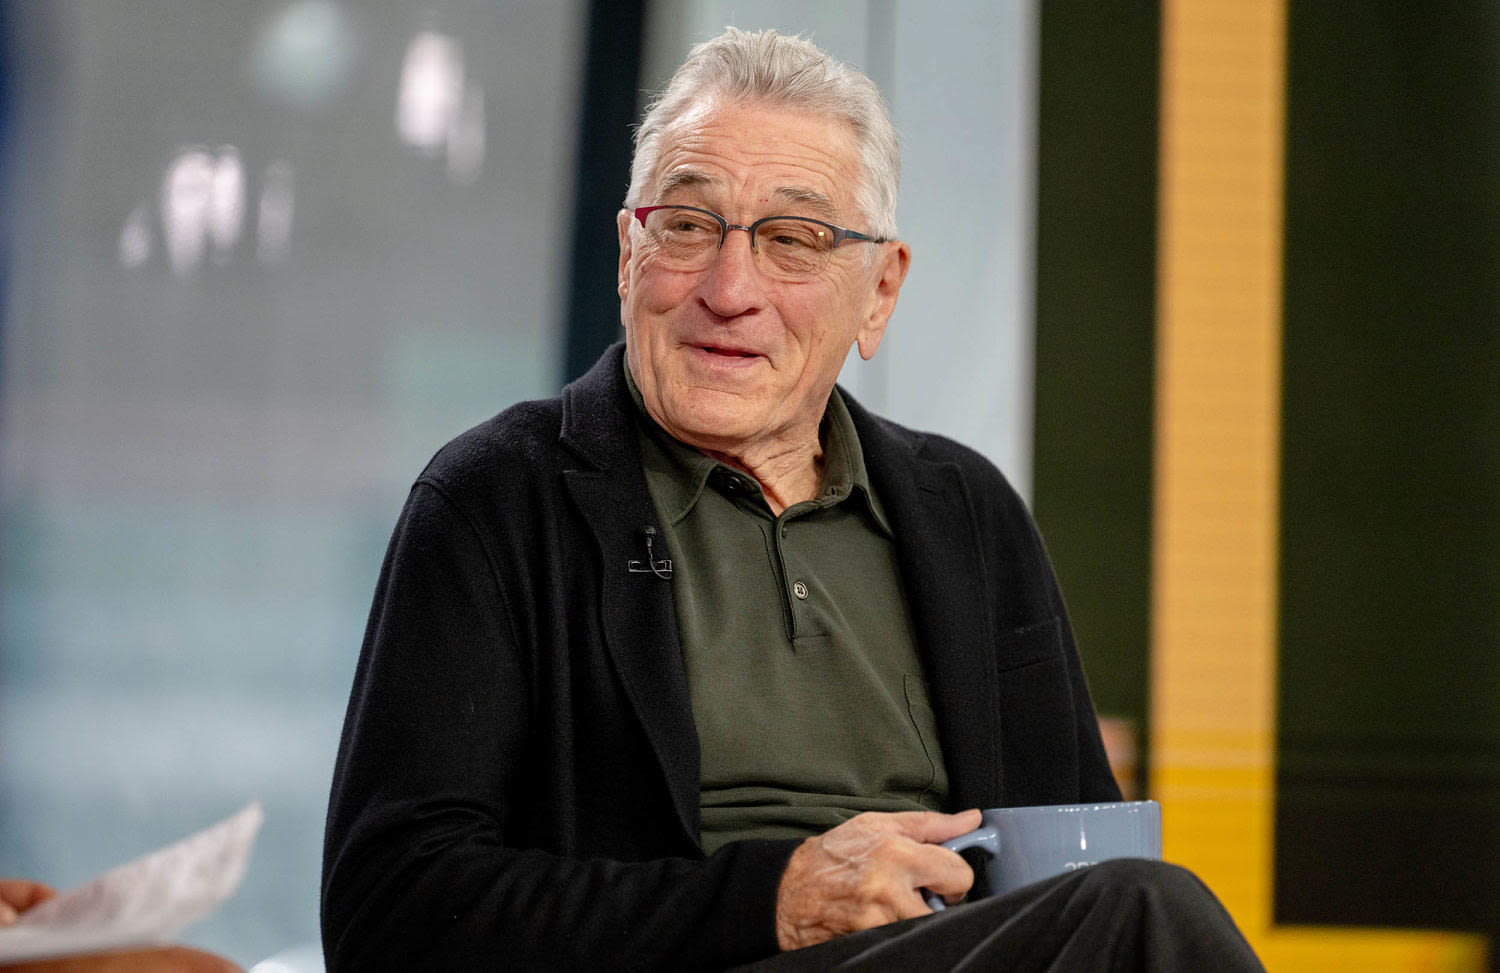 Robert De Niro on what he’s like as a dad now versus when he raised his older kids: ‘Nothing is perfect in life'